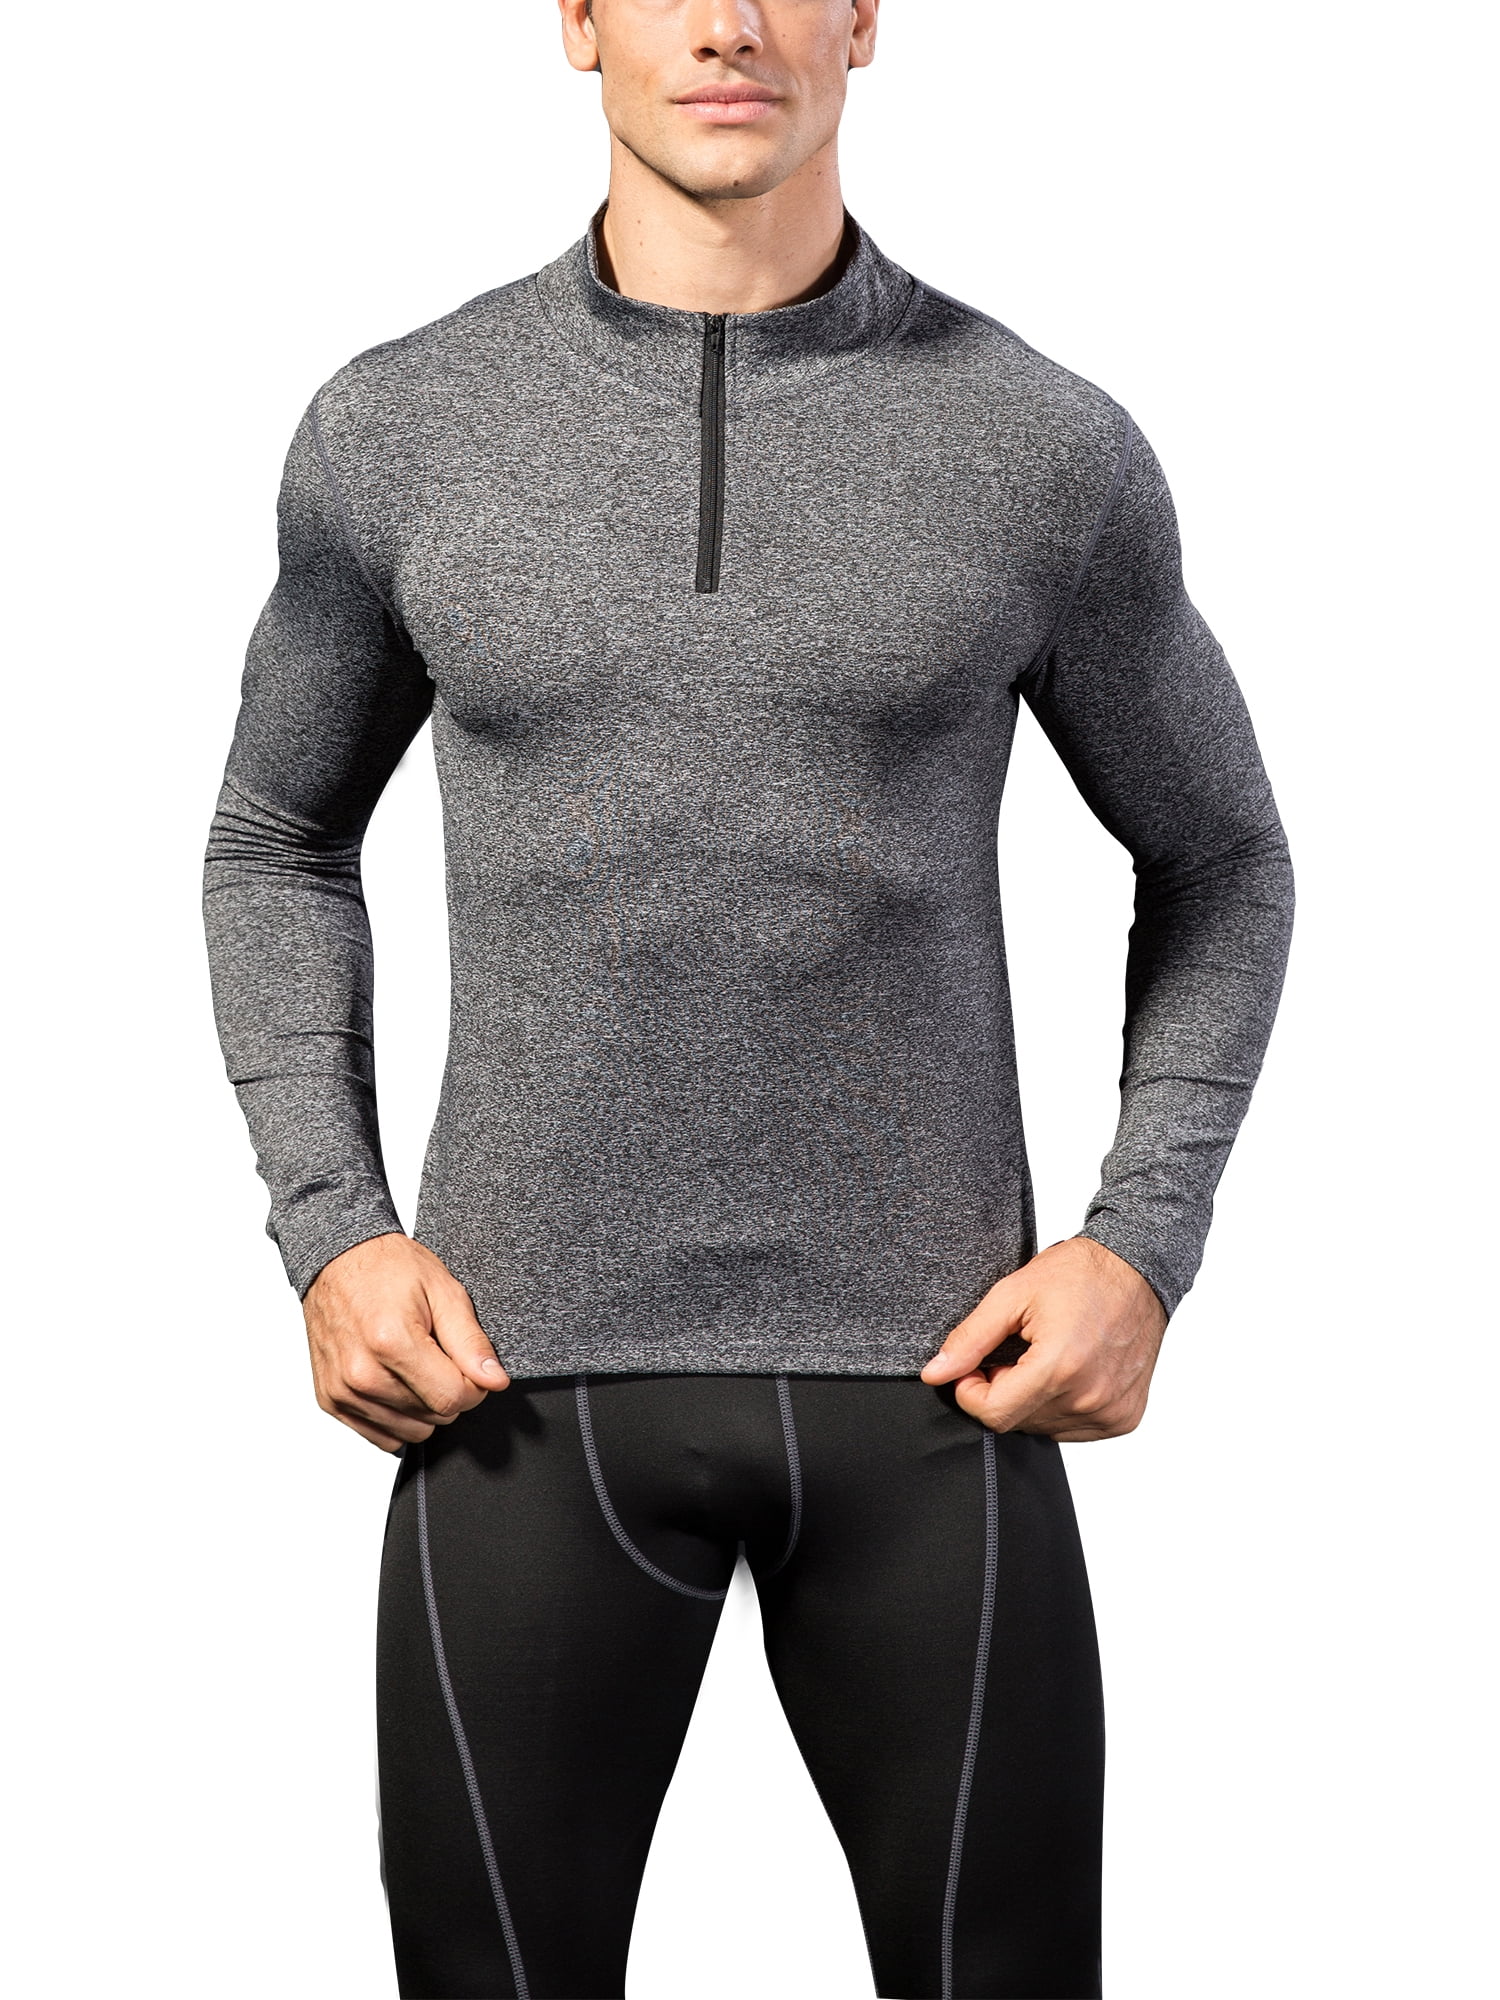 Mens Compression Shirt Long Sleeve Base Layer Tights Workout Clothes Sportswear 